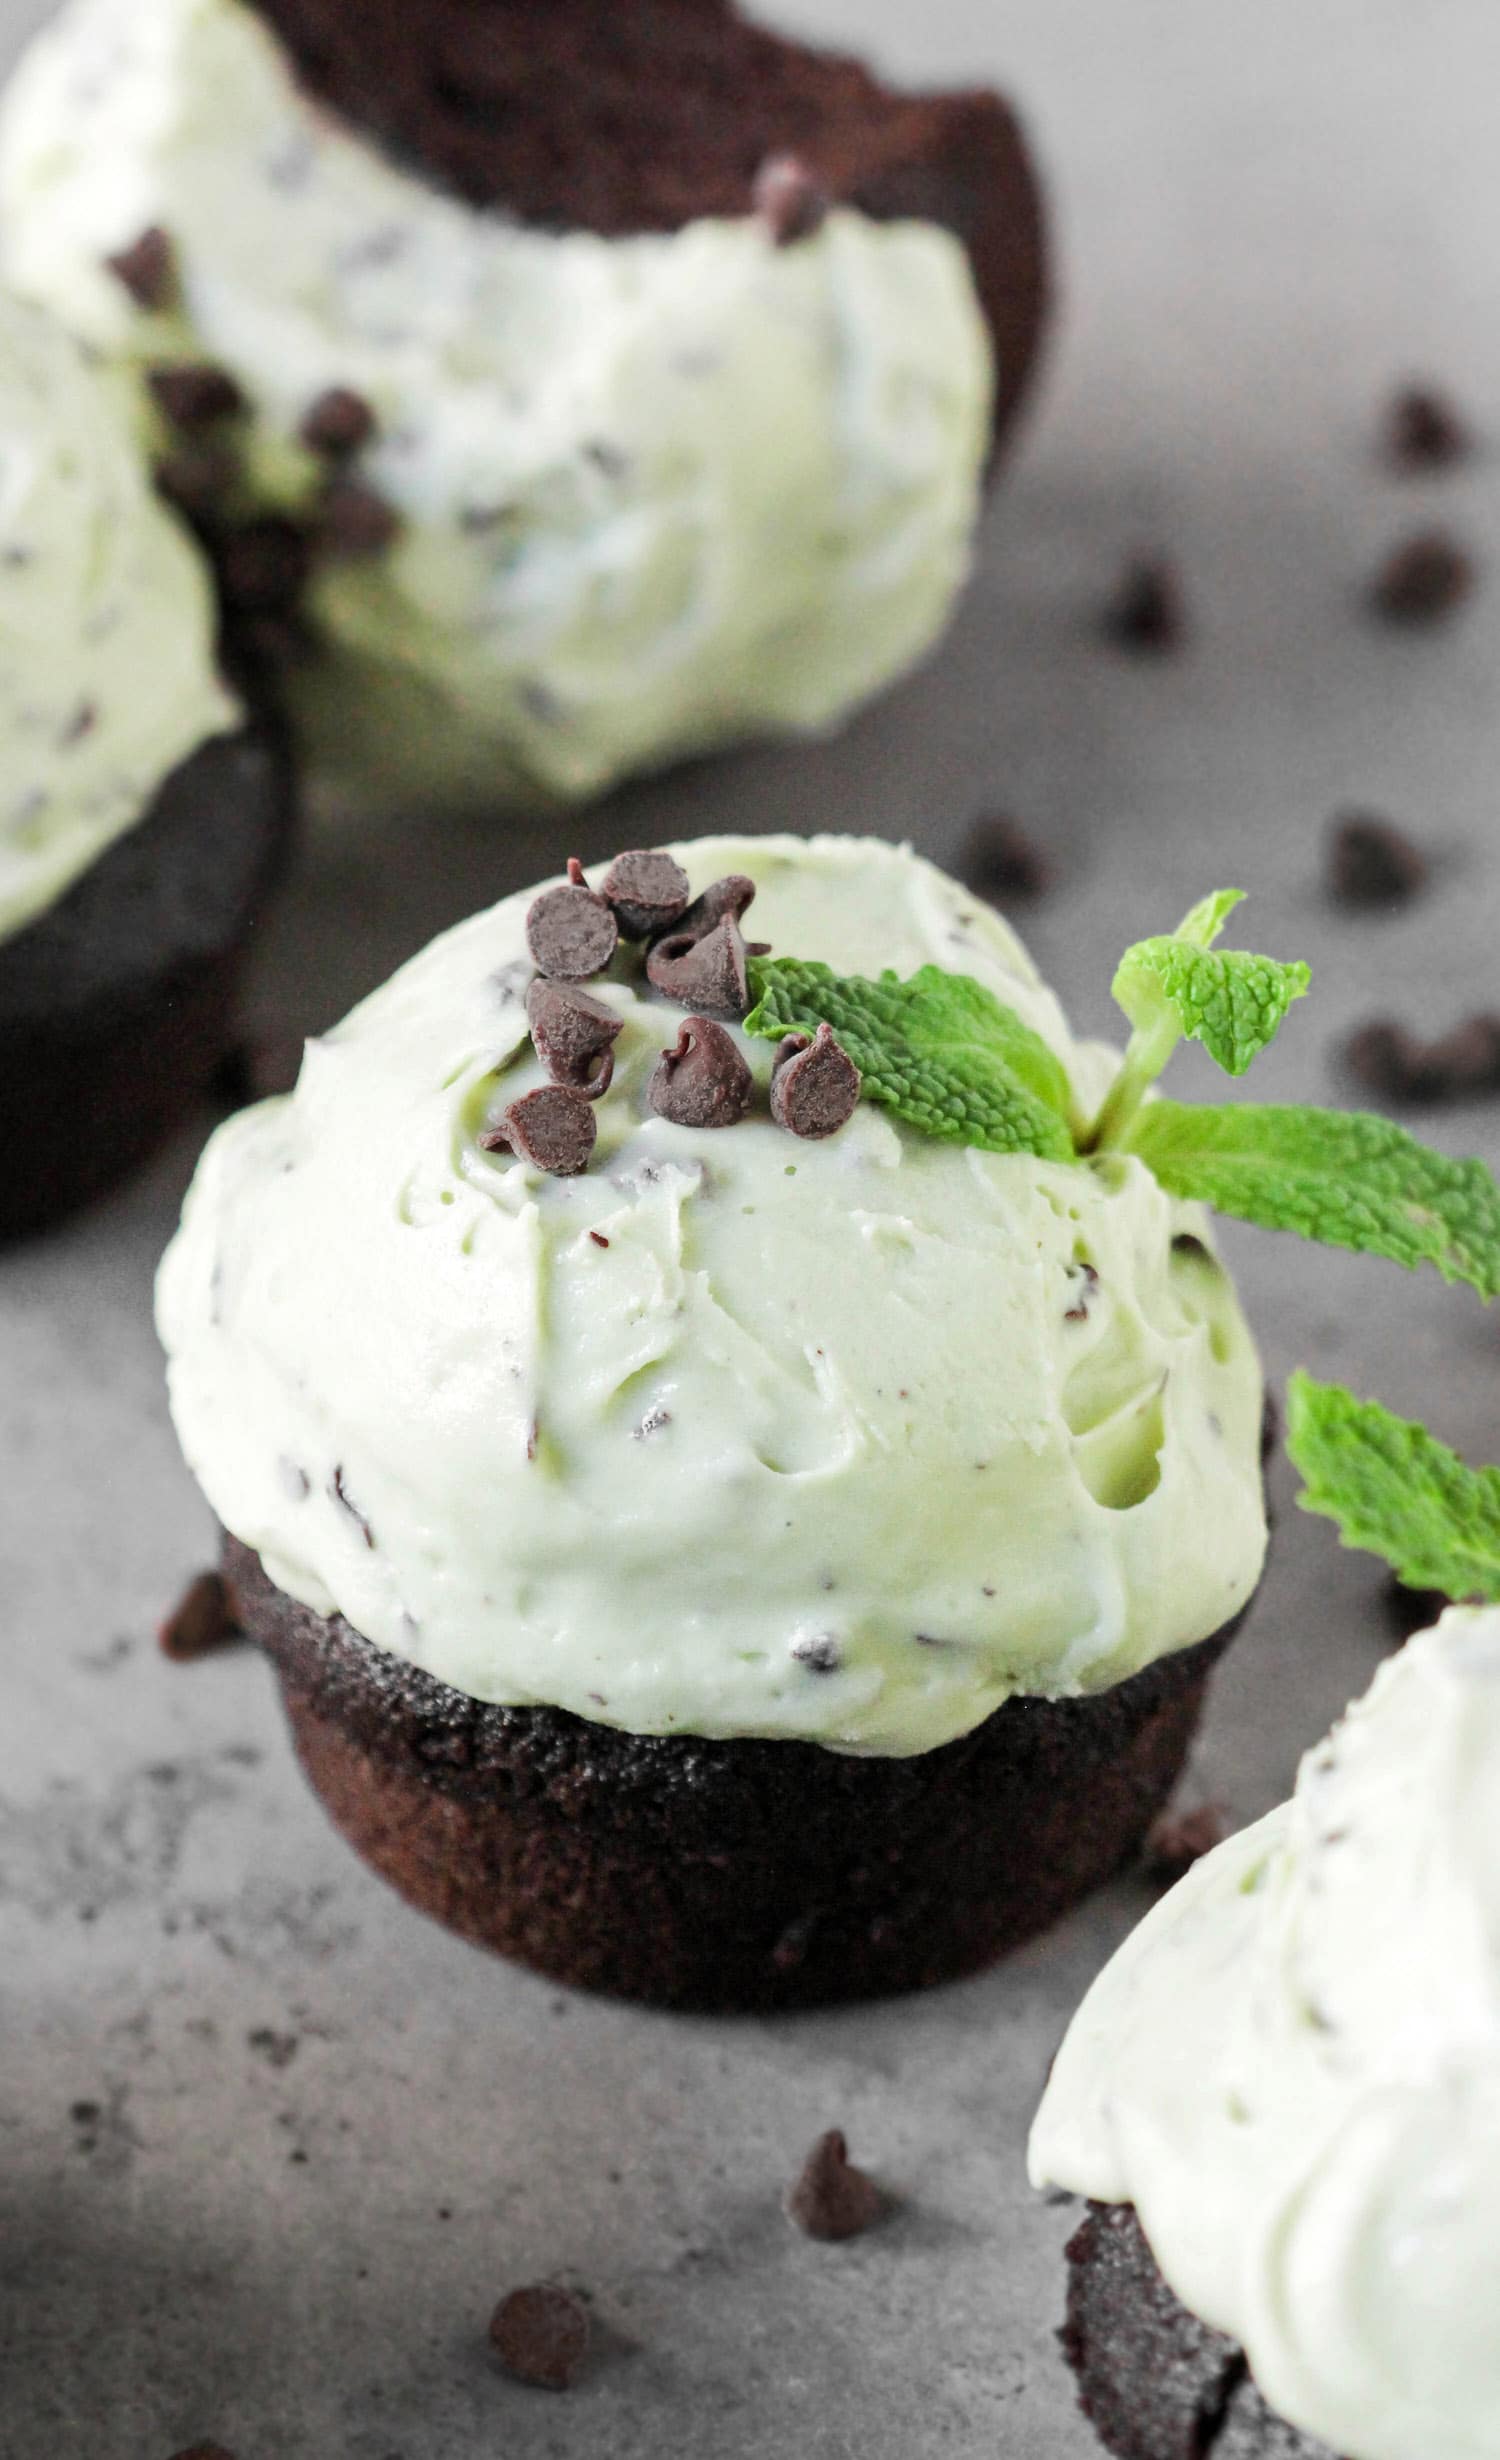 These Mint Chocolate Cupcakes are where mint chocolate chip ice cream and chocolate cupcakes COLLIDE! On top of super soft, moist, and rich chocolate cupcakes, we've got the fluffiest mint frosting studded throughout with chocolate shards. Healthy Dessert Recipes at the Desserts With Benefits Blog (www.DessertsWithBenefits.com)